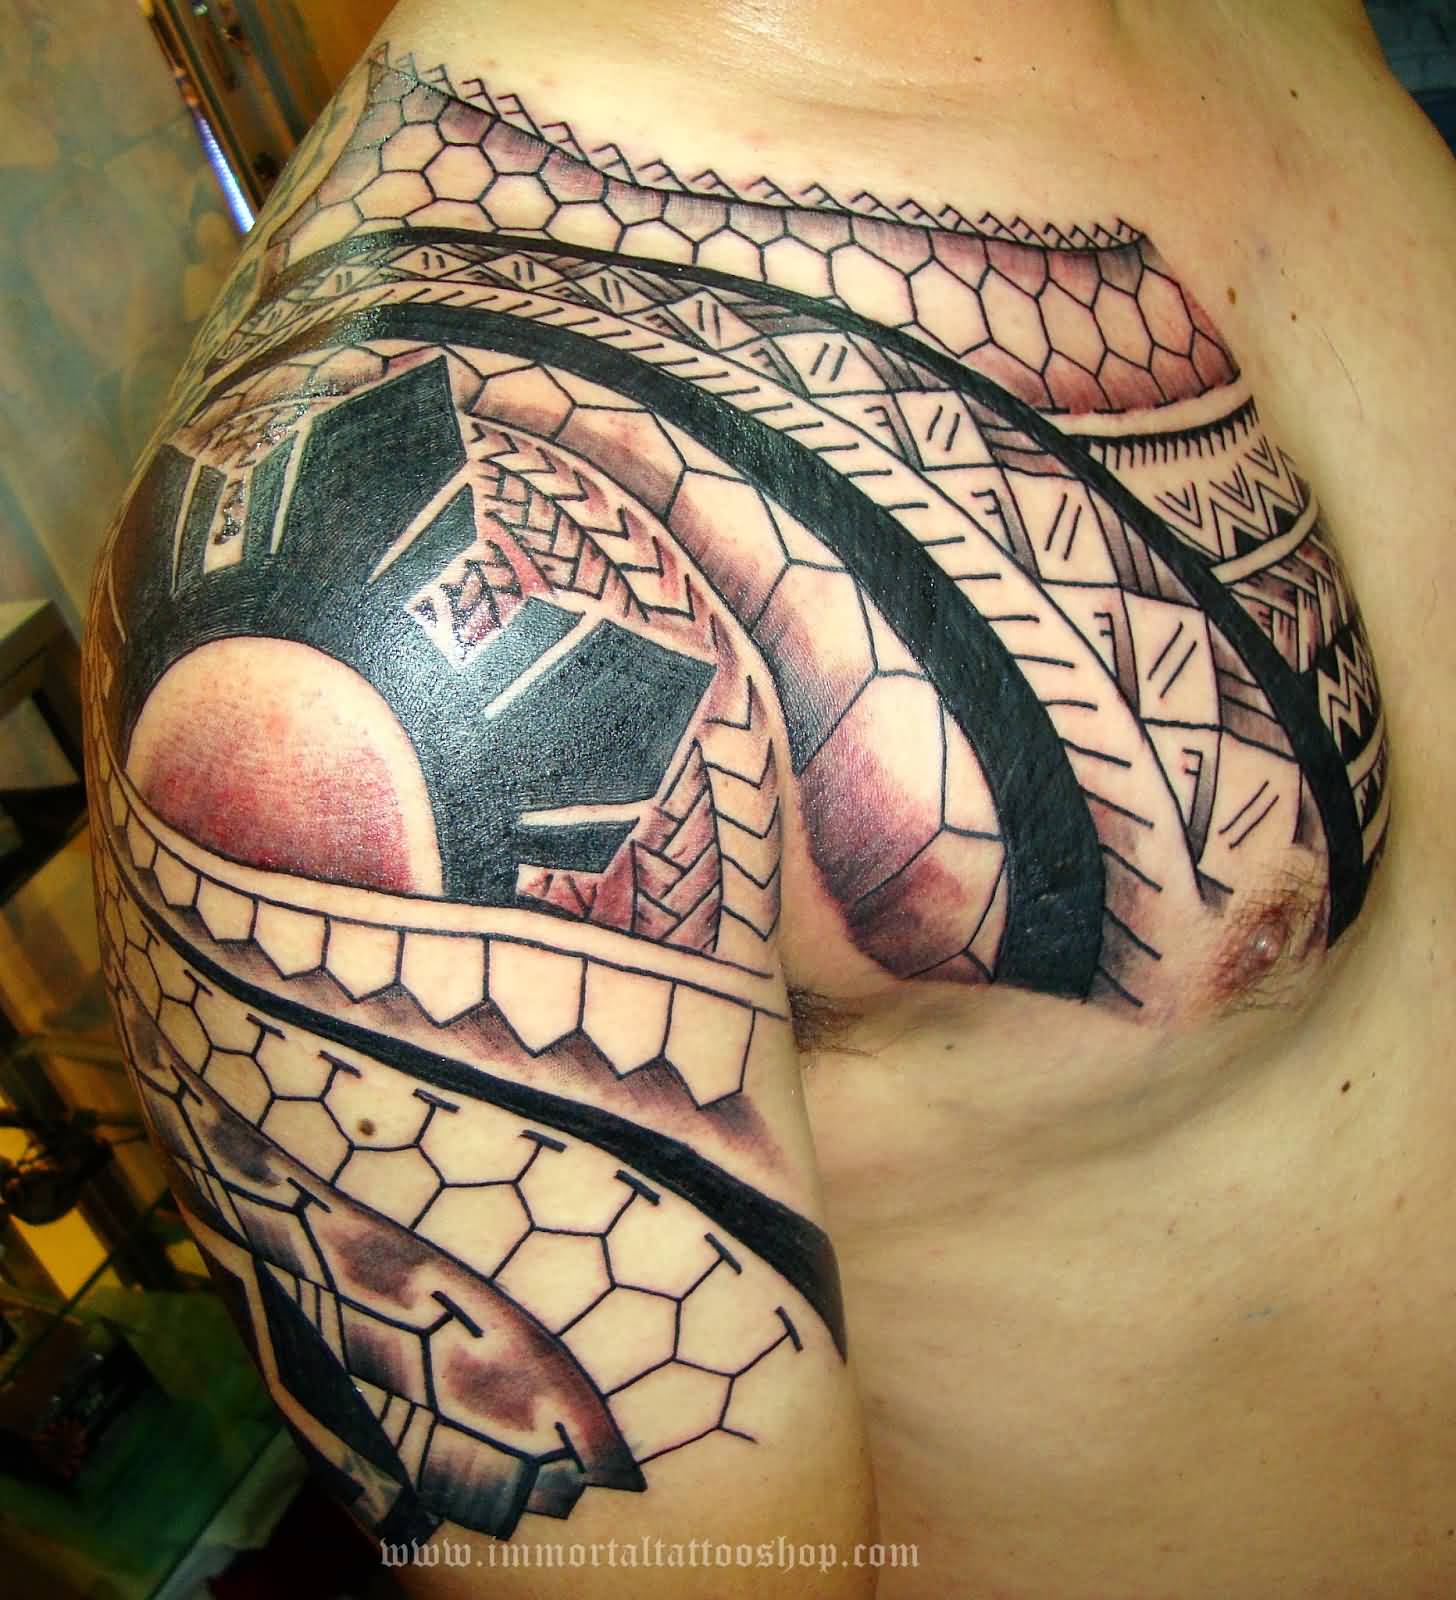 Awesome Filipino Tribal Tattoo On Man Chest And Shoulder